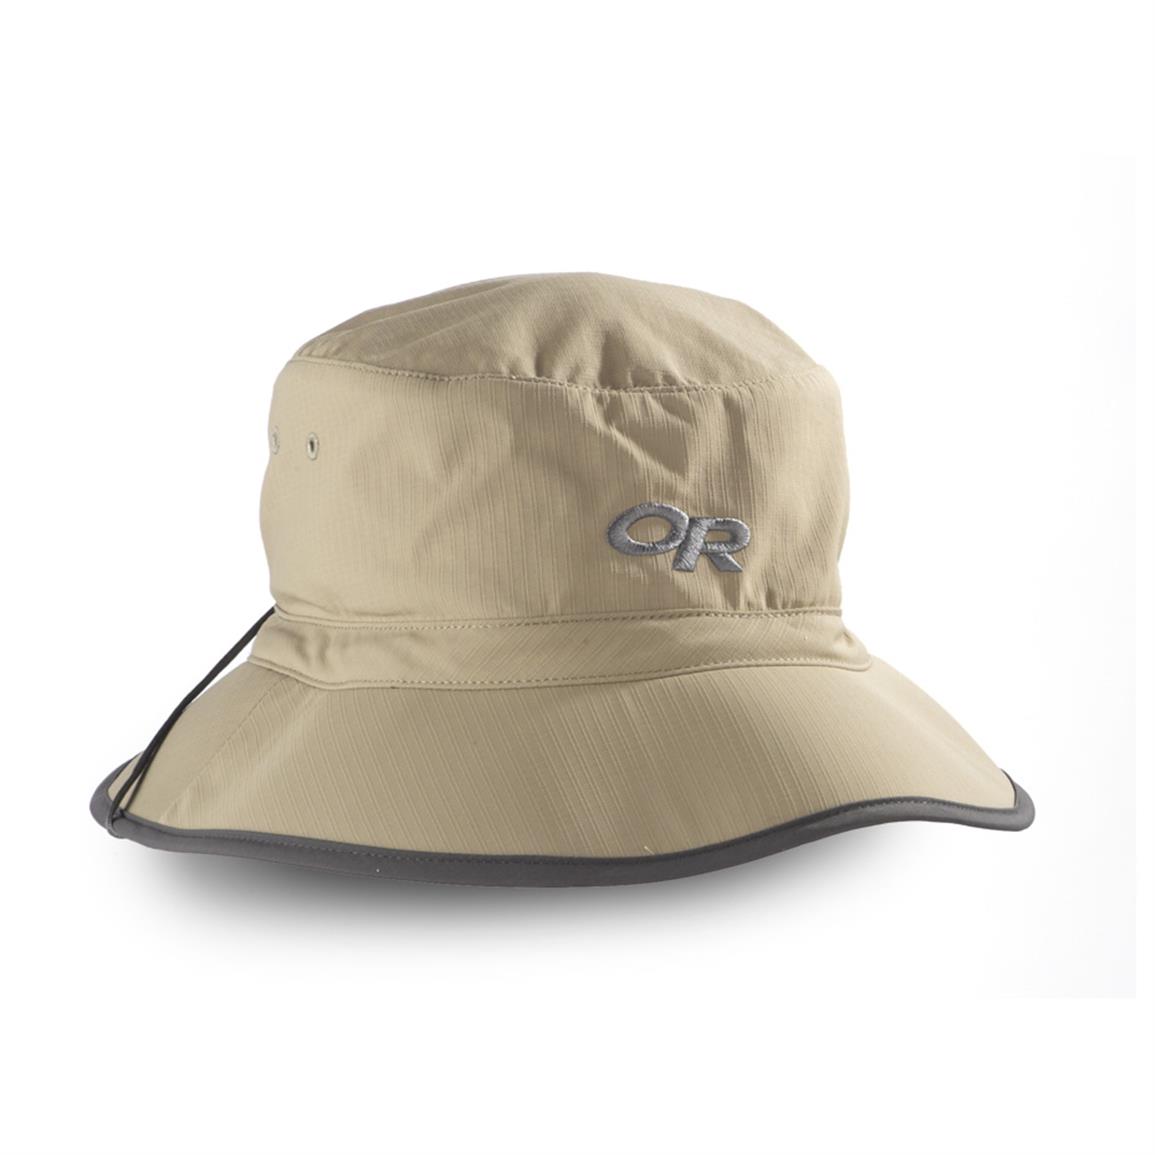 Outdoor Research Sun Bucket Hat - 623338, Hats & Caps at Sportsman's Guide